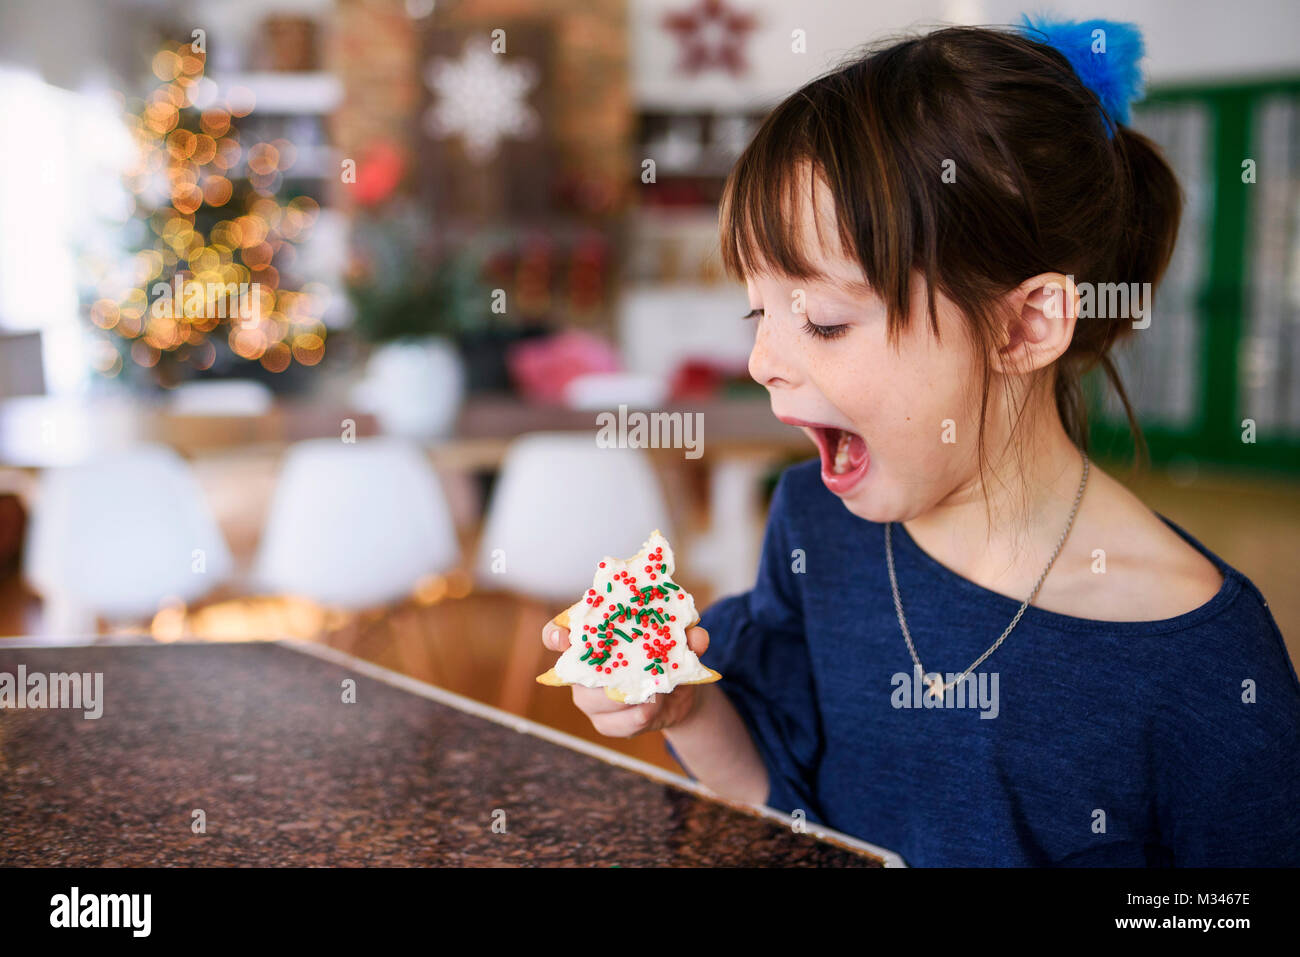 Girl about to eat a Christmas cookie Stock Photo